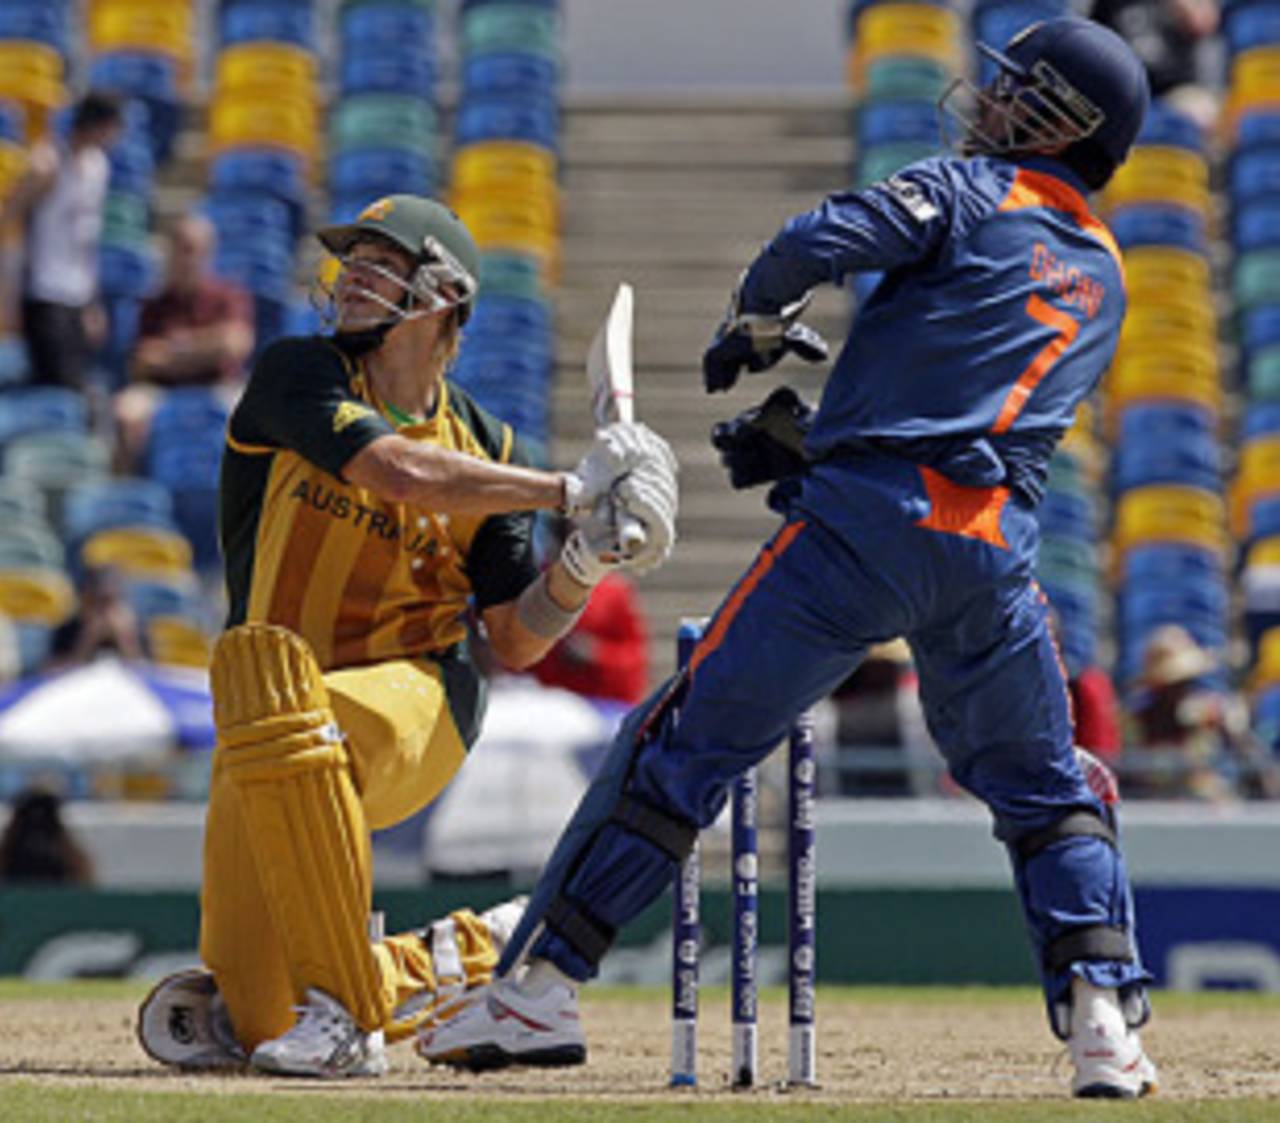 Shane Watson's knock exemplified Australia's stand-and-deliver approach&nbsp;&nbsp;&bull;&nbsp;&nbsp;Associated Press